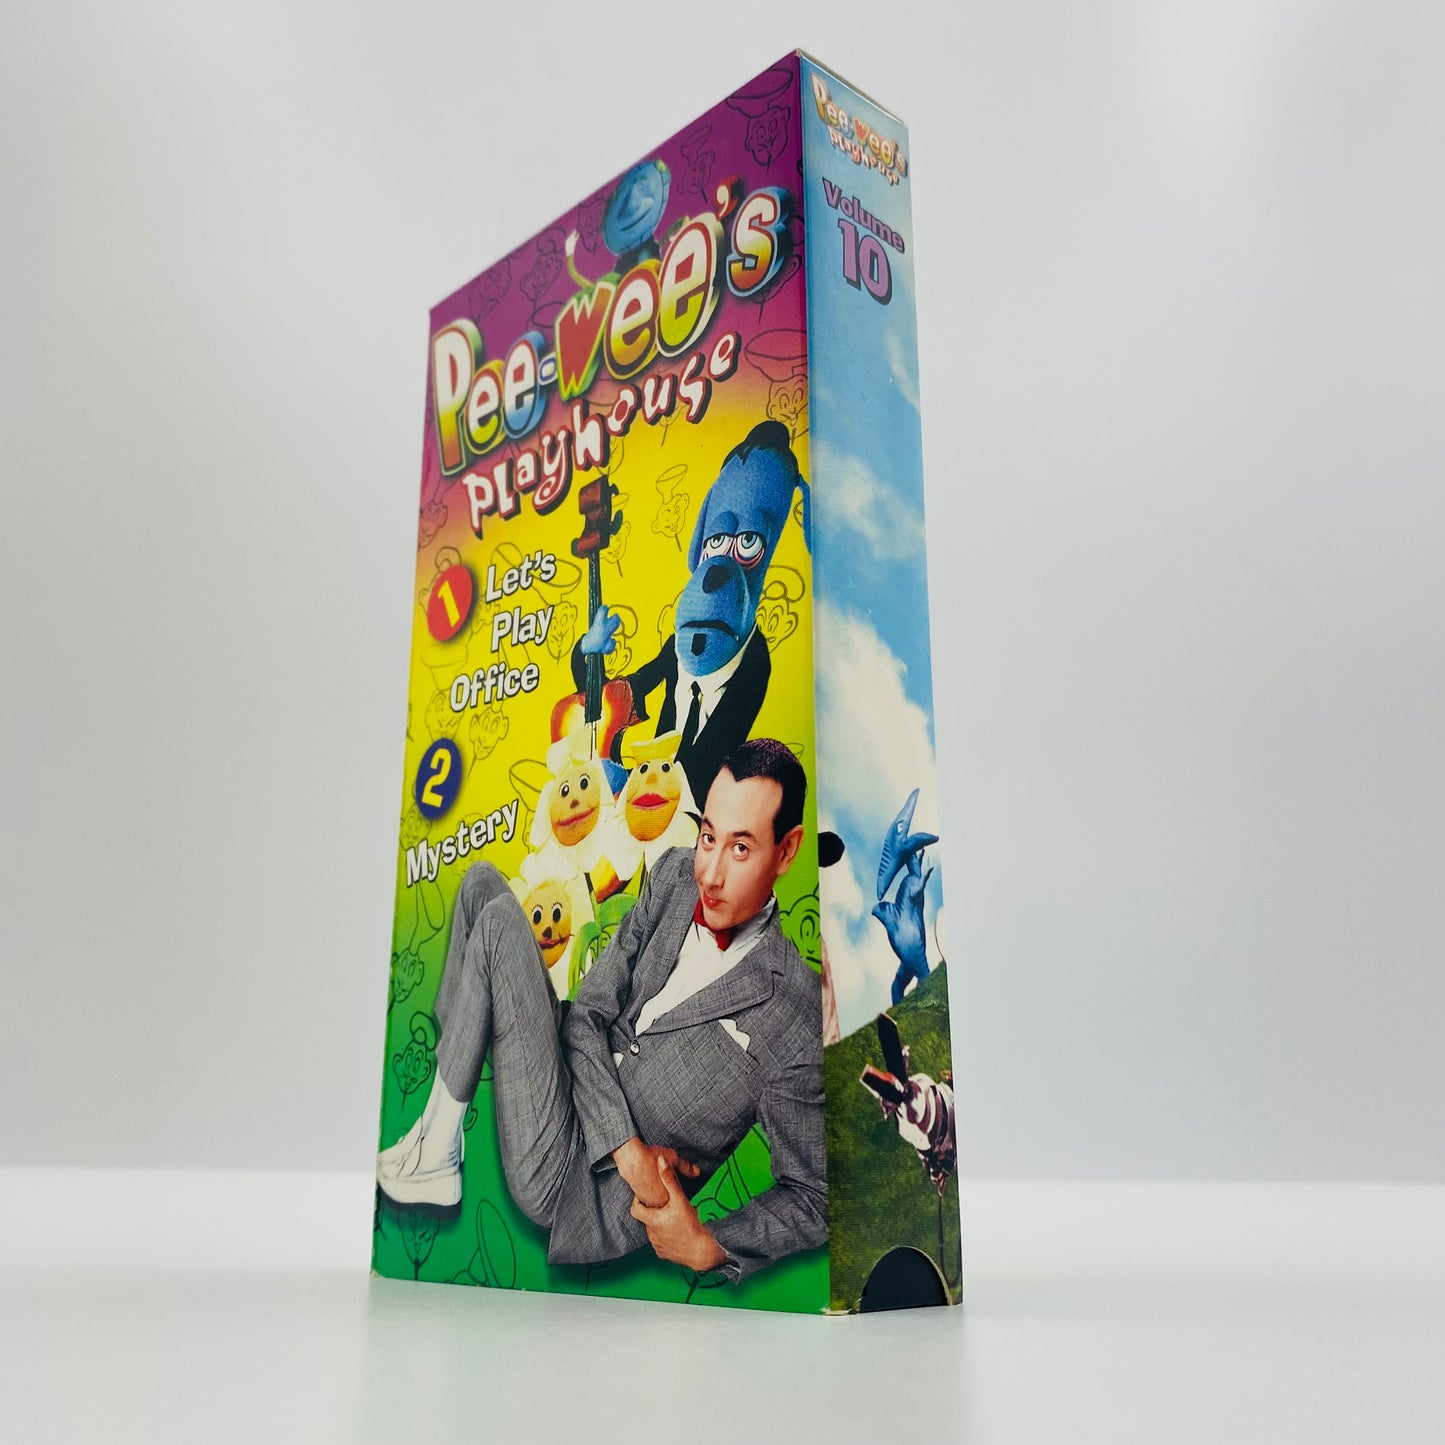 Pee-Wee’s Playhouse volume 10 VHS tape (1996) MGM/UA Home Video